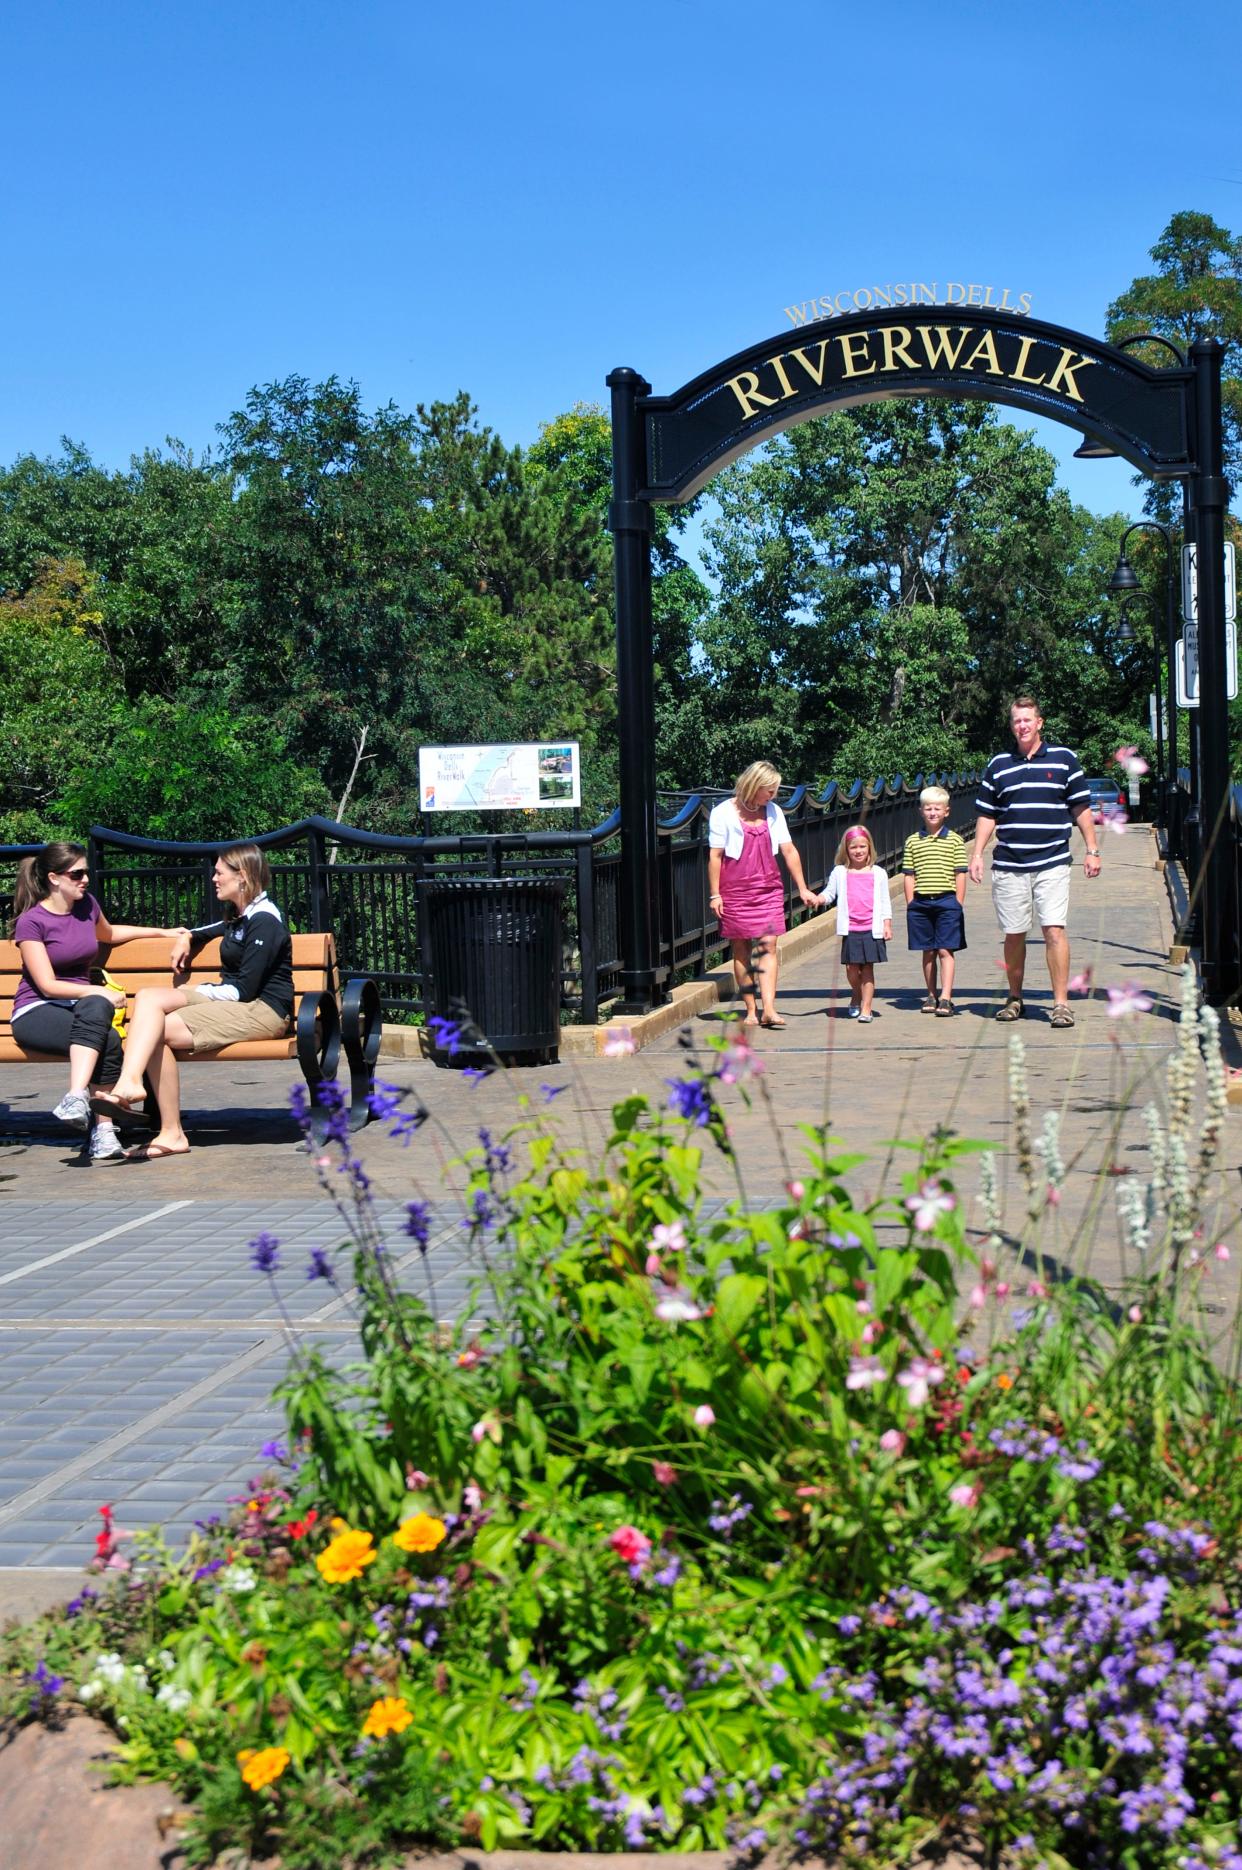 The paved, accessible Riverwalk in Wisconsin Dells stretches for about half a mile along the Wisconsin River.